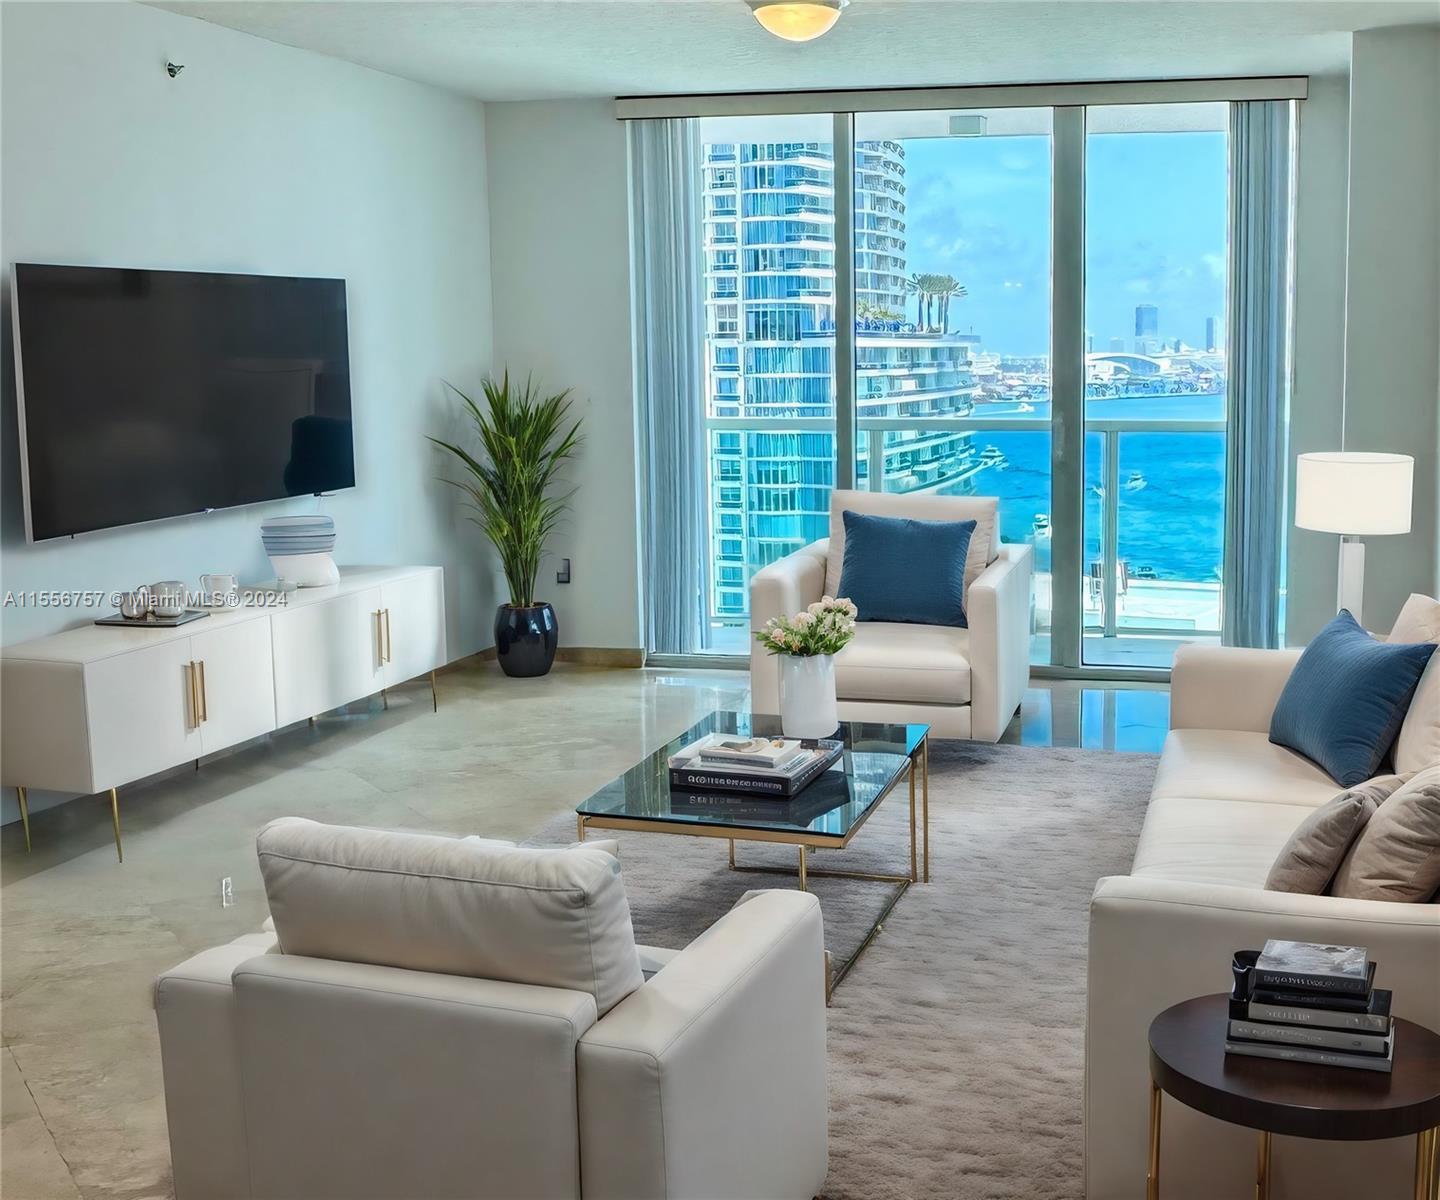 Water views from every room in this great 2 bedroom 2 bathroom unit at Brickell On The River North.  This unit features marble floors throughout, a spacious split floor plan and very nice river, bay, city and sunrise views.  One assigned parking space, Resort Style Amenities that include 2 Pools, Spa, Jacuzzi, Steam Room, 3 Story Gym, Yoga Room and a Business center, as well as 24-hourFront desk & Valet.  The building is centrally located, two blocks from Brickell City Center shops & restuarants and walking distance to Mary Brickell Village.